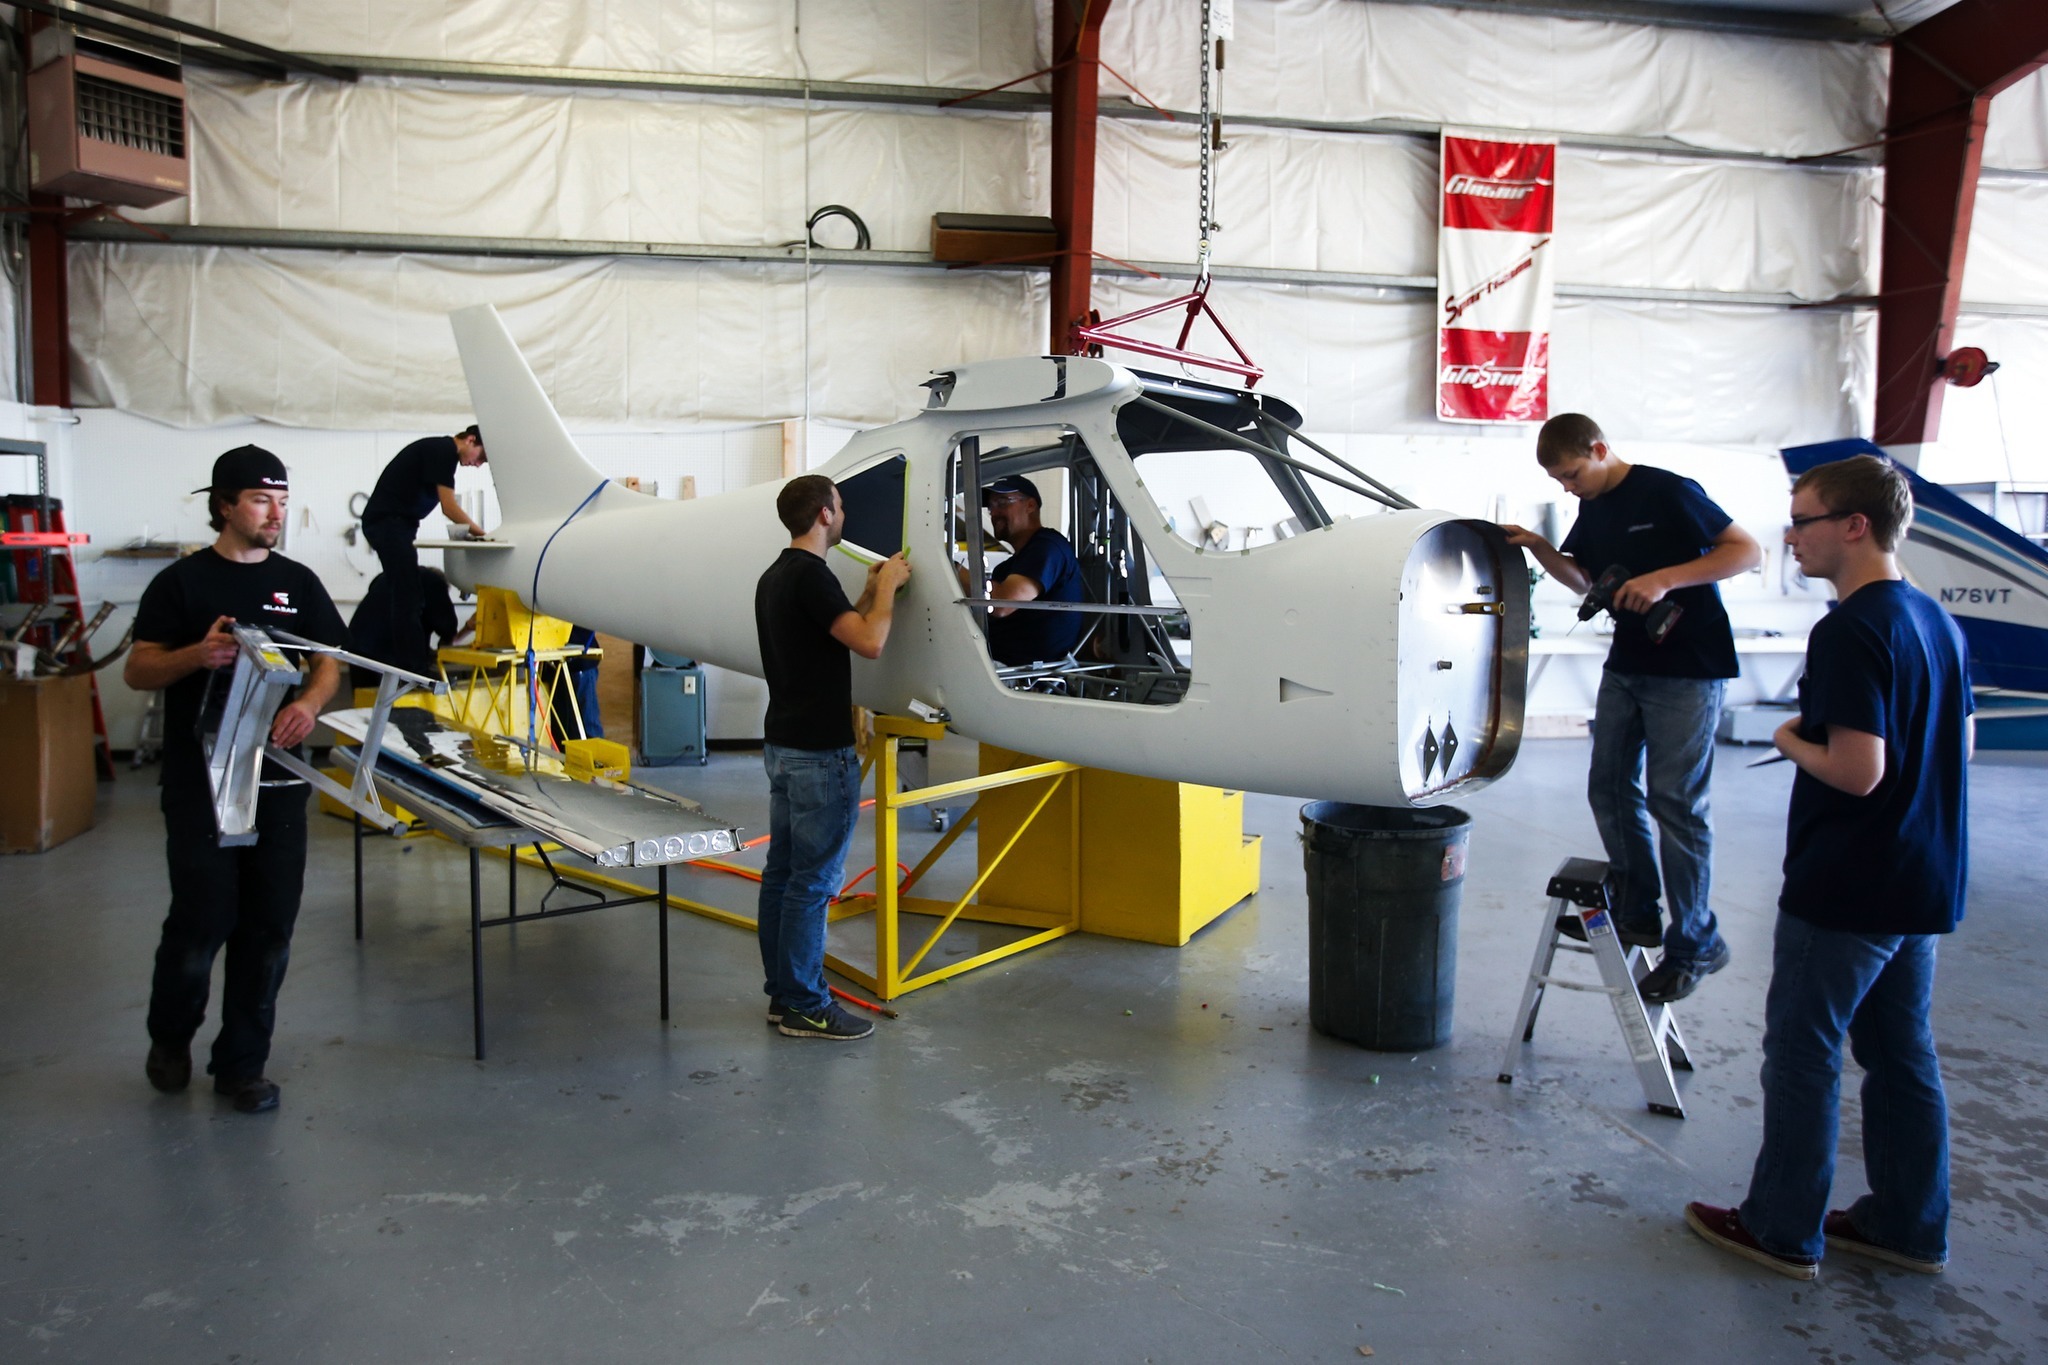 Students from Weyauwega-Fremont High School in Wisconsin work together with Glasair Aviation employees to build a Sportsman aircraft at the company’s manufacturing facility in Arlington on June 22. Four students were selected to spend two weeks working with and learning from professional mechanics at Glasair as part of the General Aviation Manufacturers Association’s Aviation Design Challenge. (Ian Terry / The Herald)